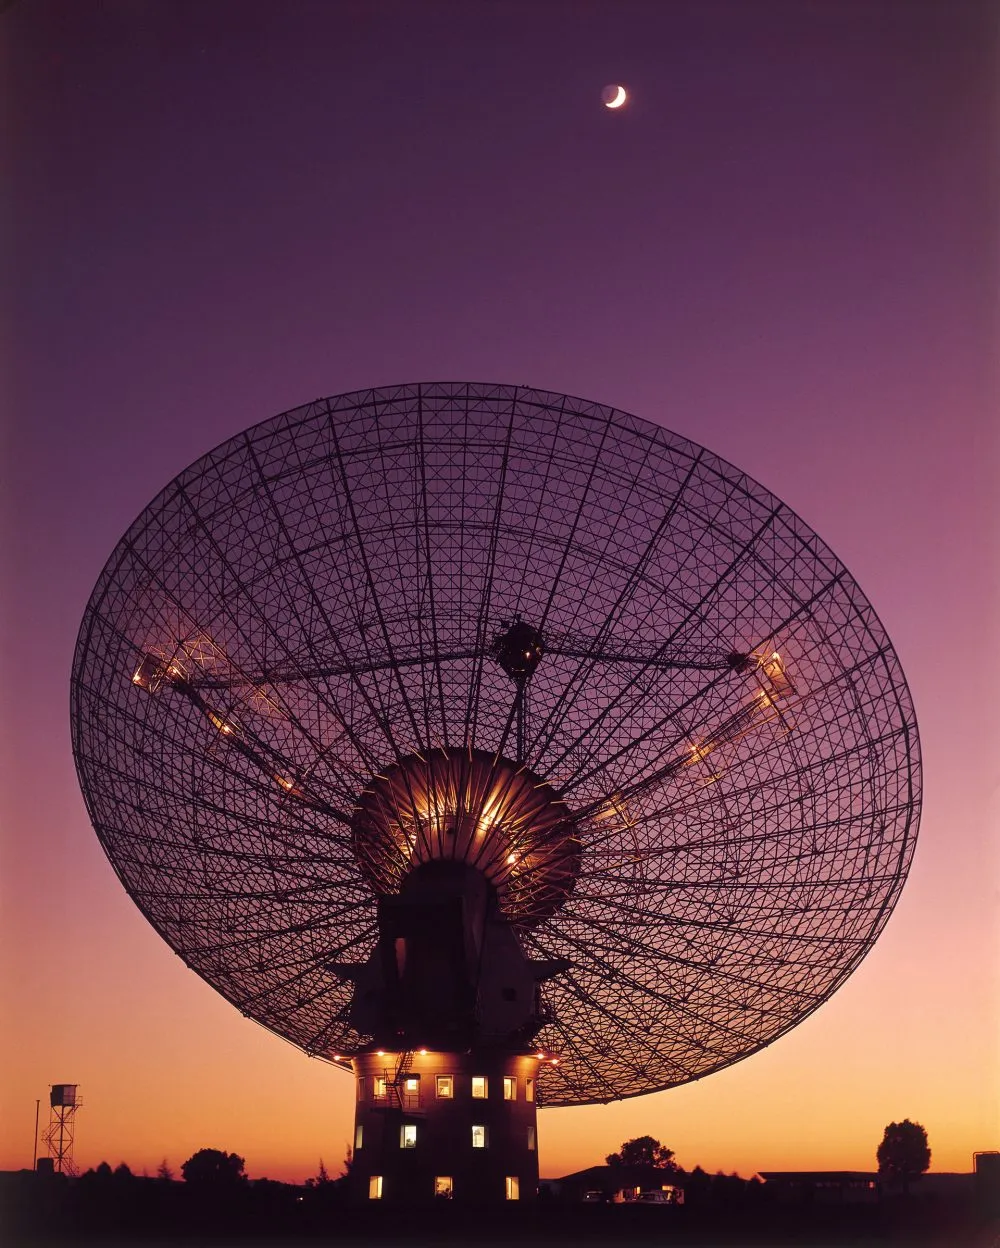 An image of the Parkes radio telescope captured in 1969, around the same time as the Apollo 11 moonlanding. Credit: CSIRO